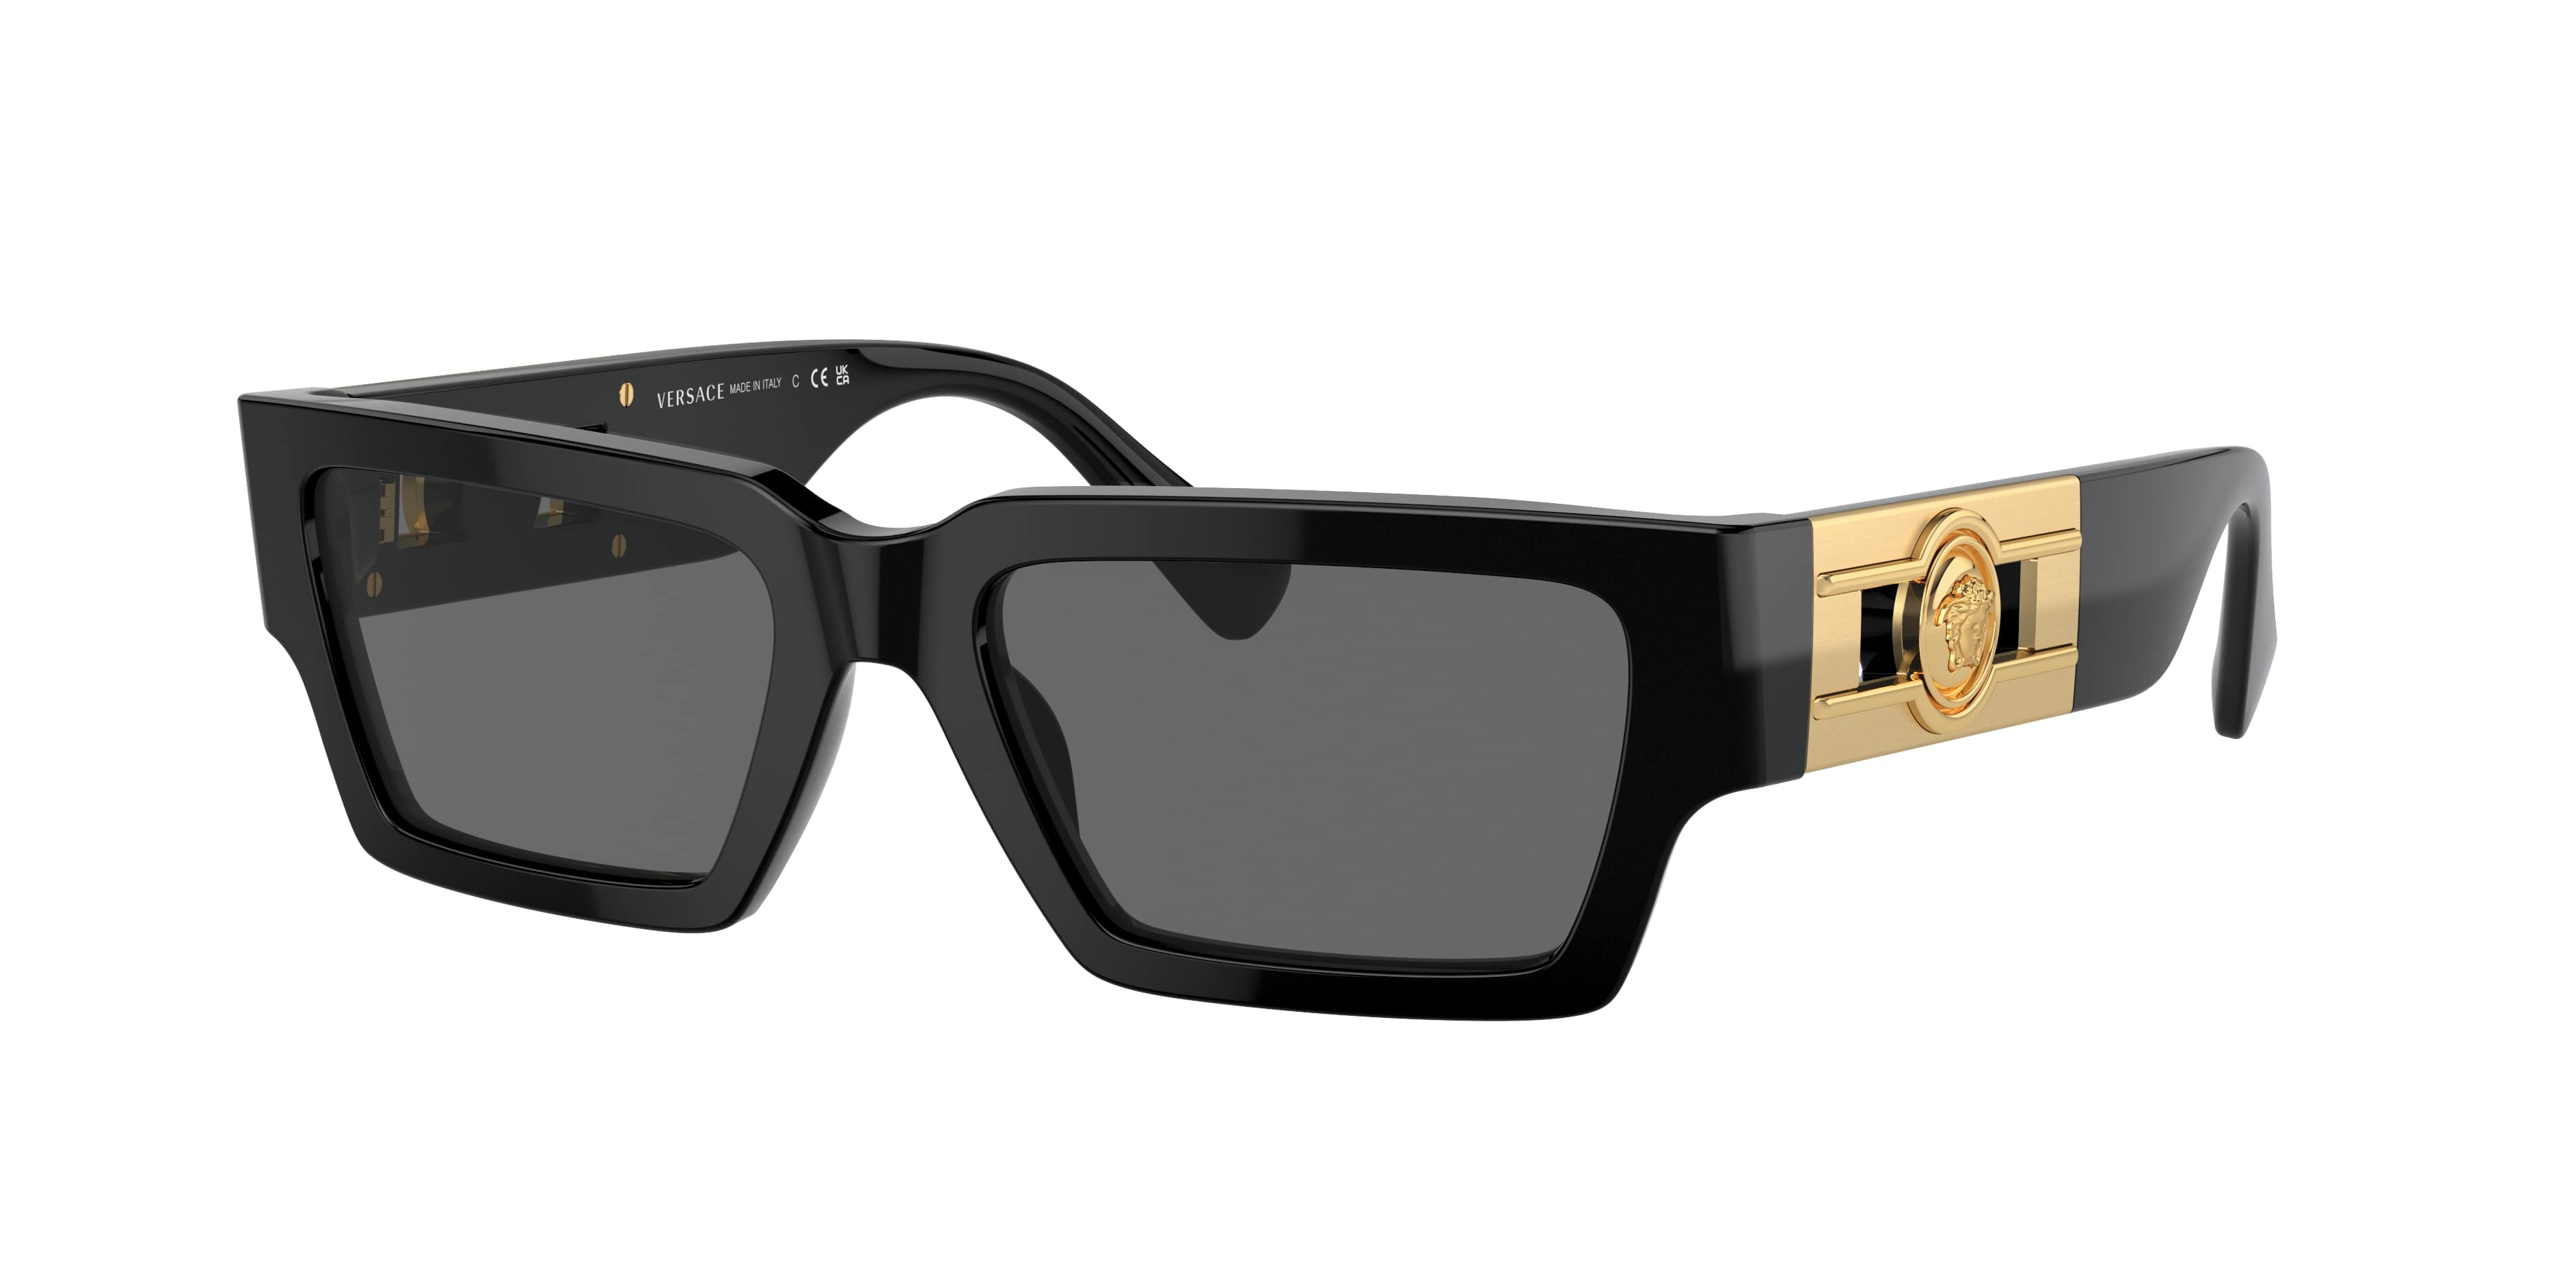 Sunglass Hut® South Africa Online Store | Products | Versace